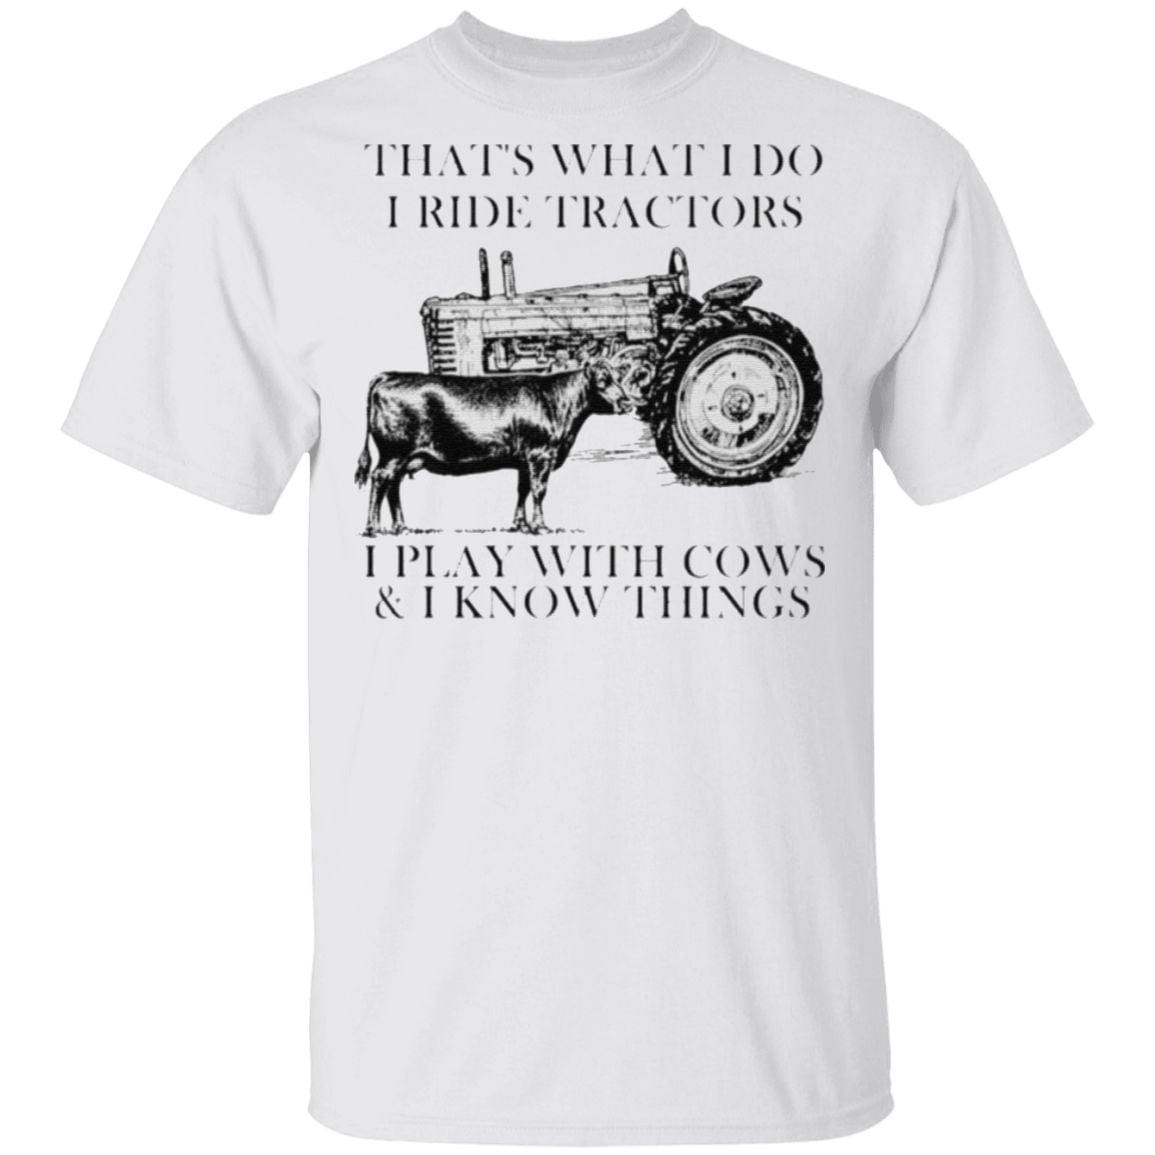 That’s what I do I ride tractors I play with cows and I know things t shirt